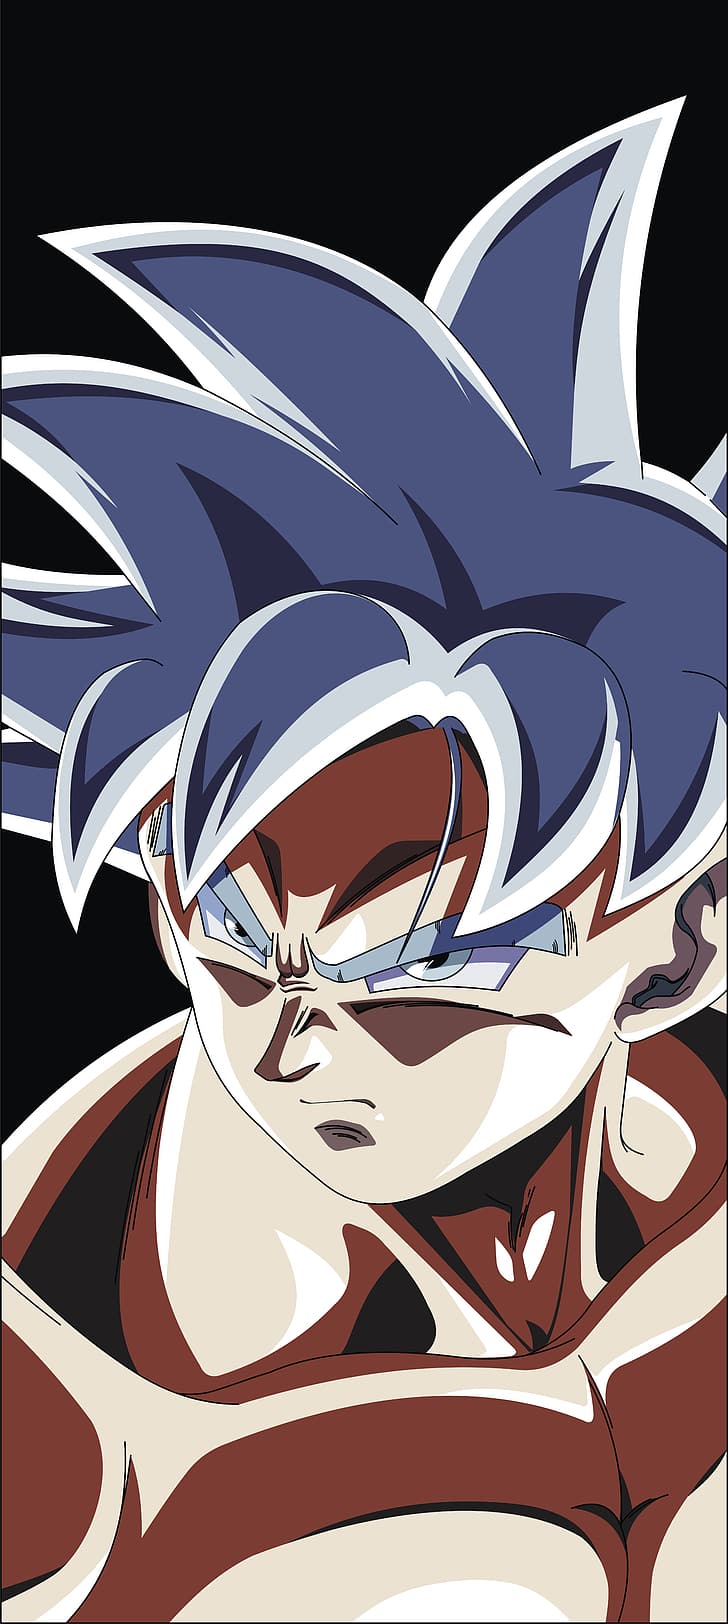 Download this Wallpaper Anime/Dragon Ball Super (720x1280) for all your  Phones and Tablets.